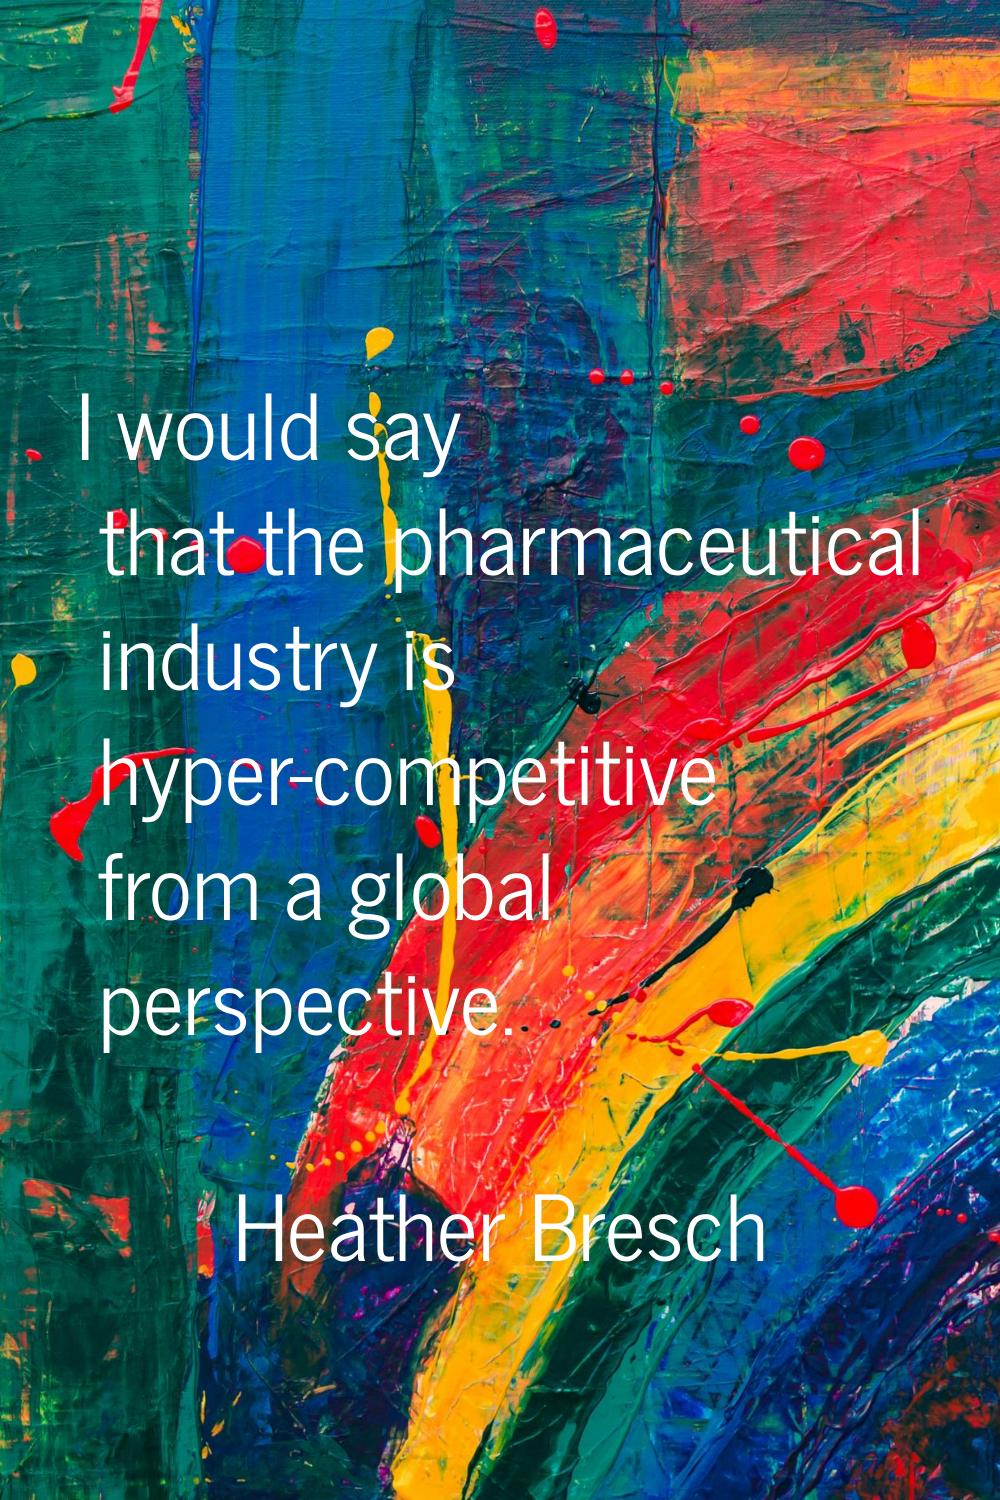 I would say that the pharmaceutical industry is hyper-competitive from a global perspective.